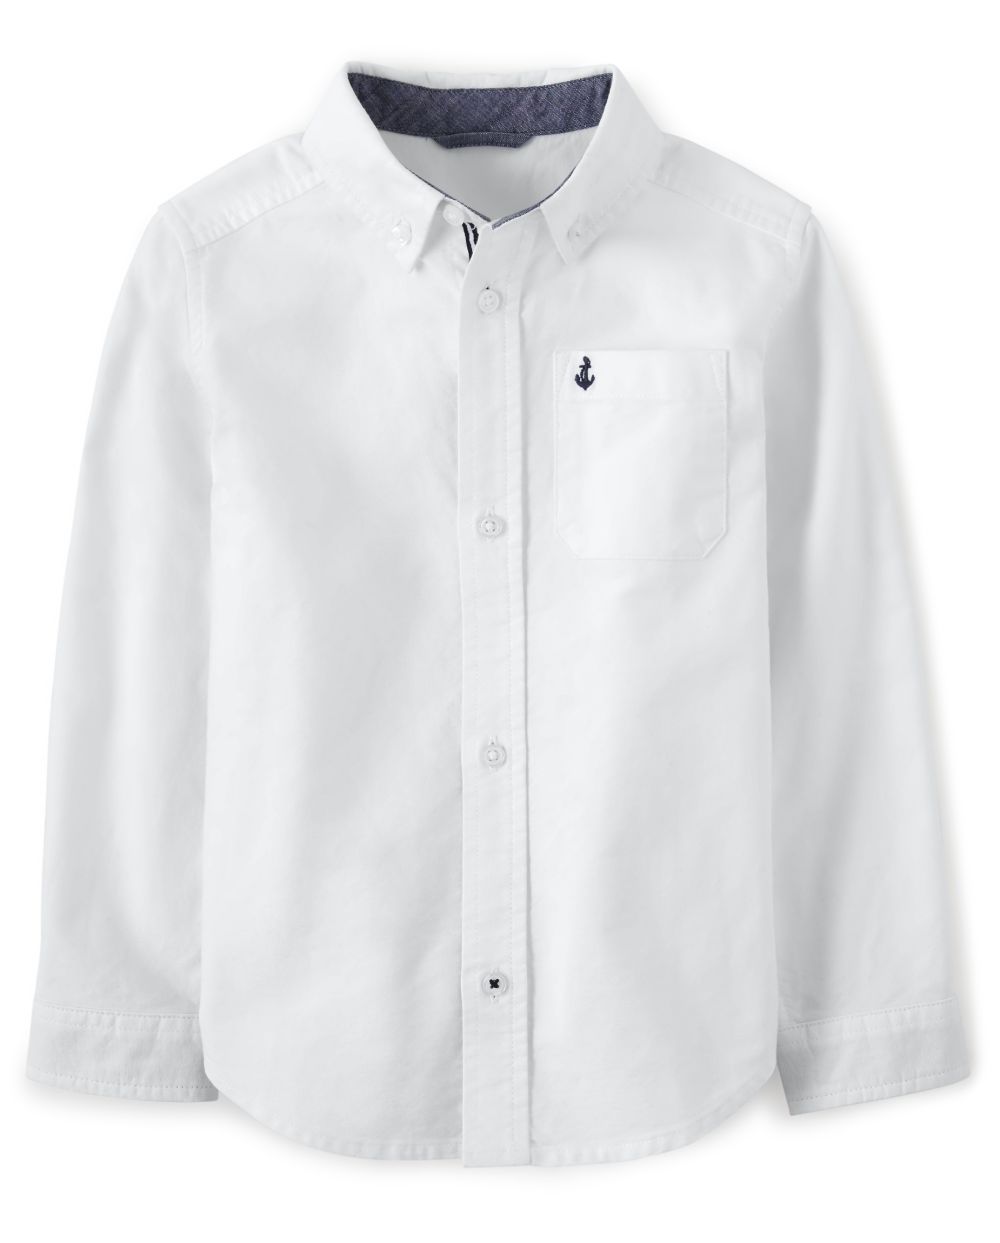 Boys Long Sleeve Embroidered Anchor Oxford Button Up Shirt - Spring Jubilee